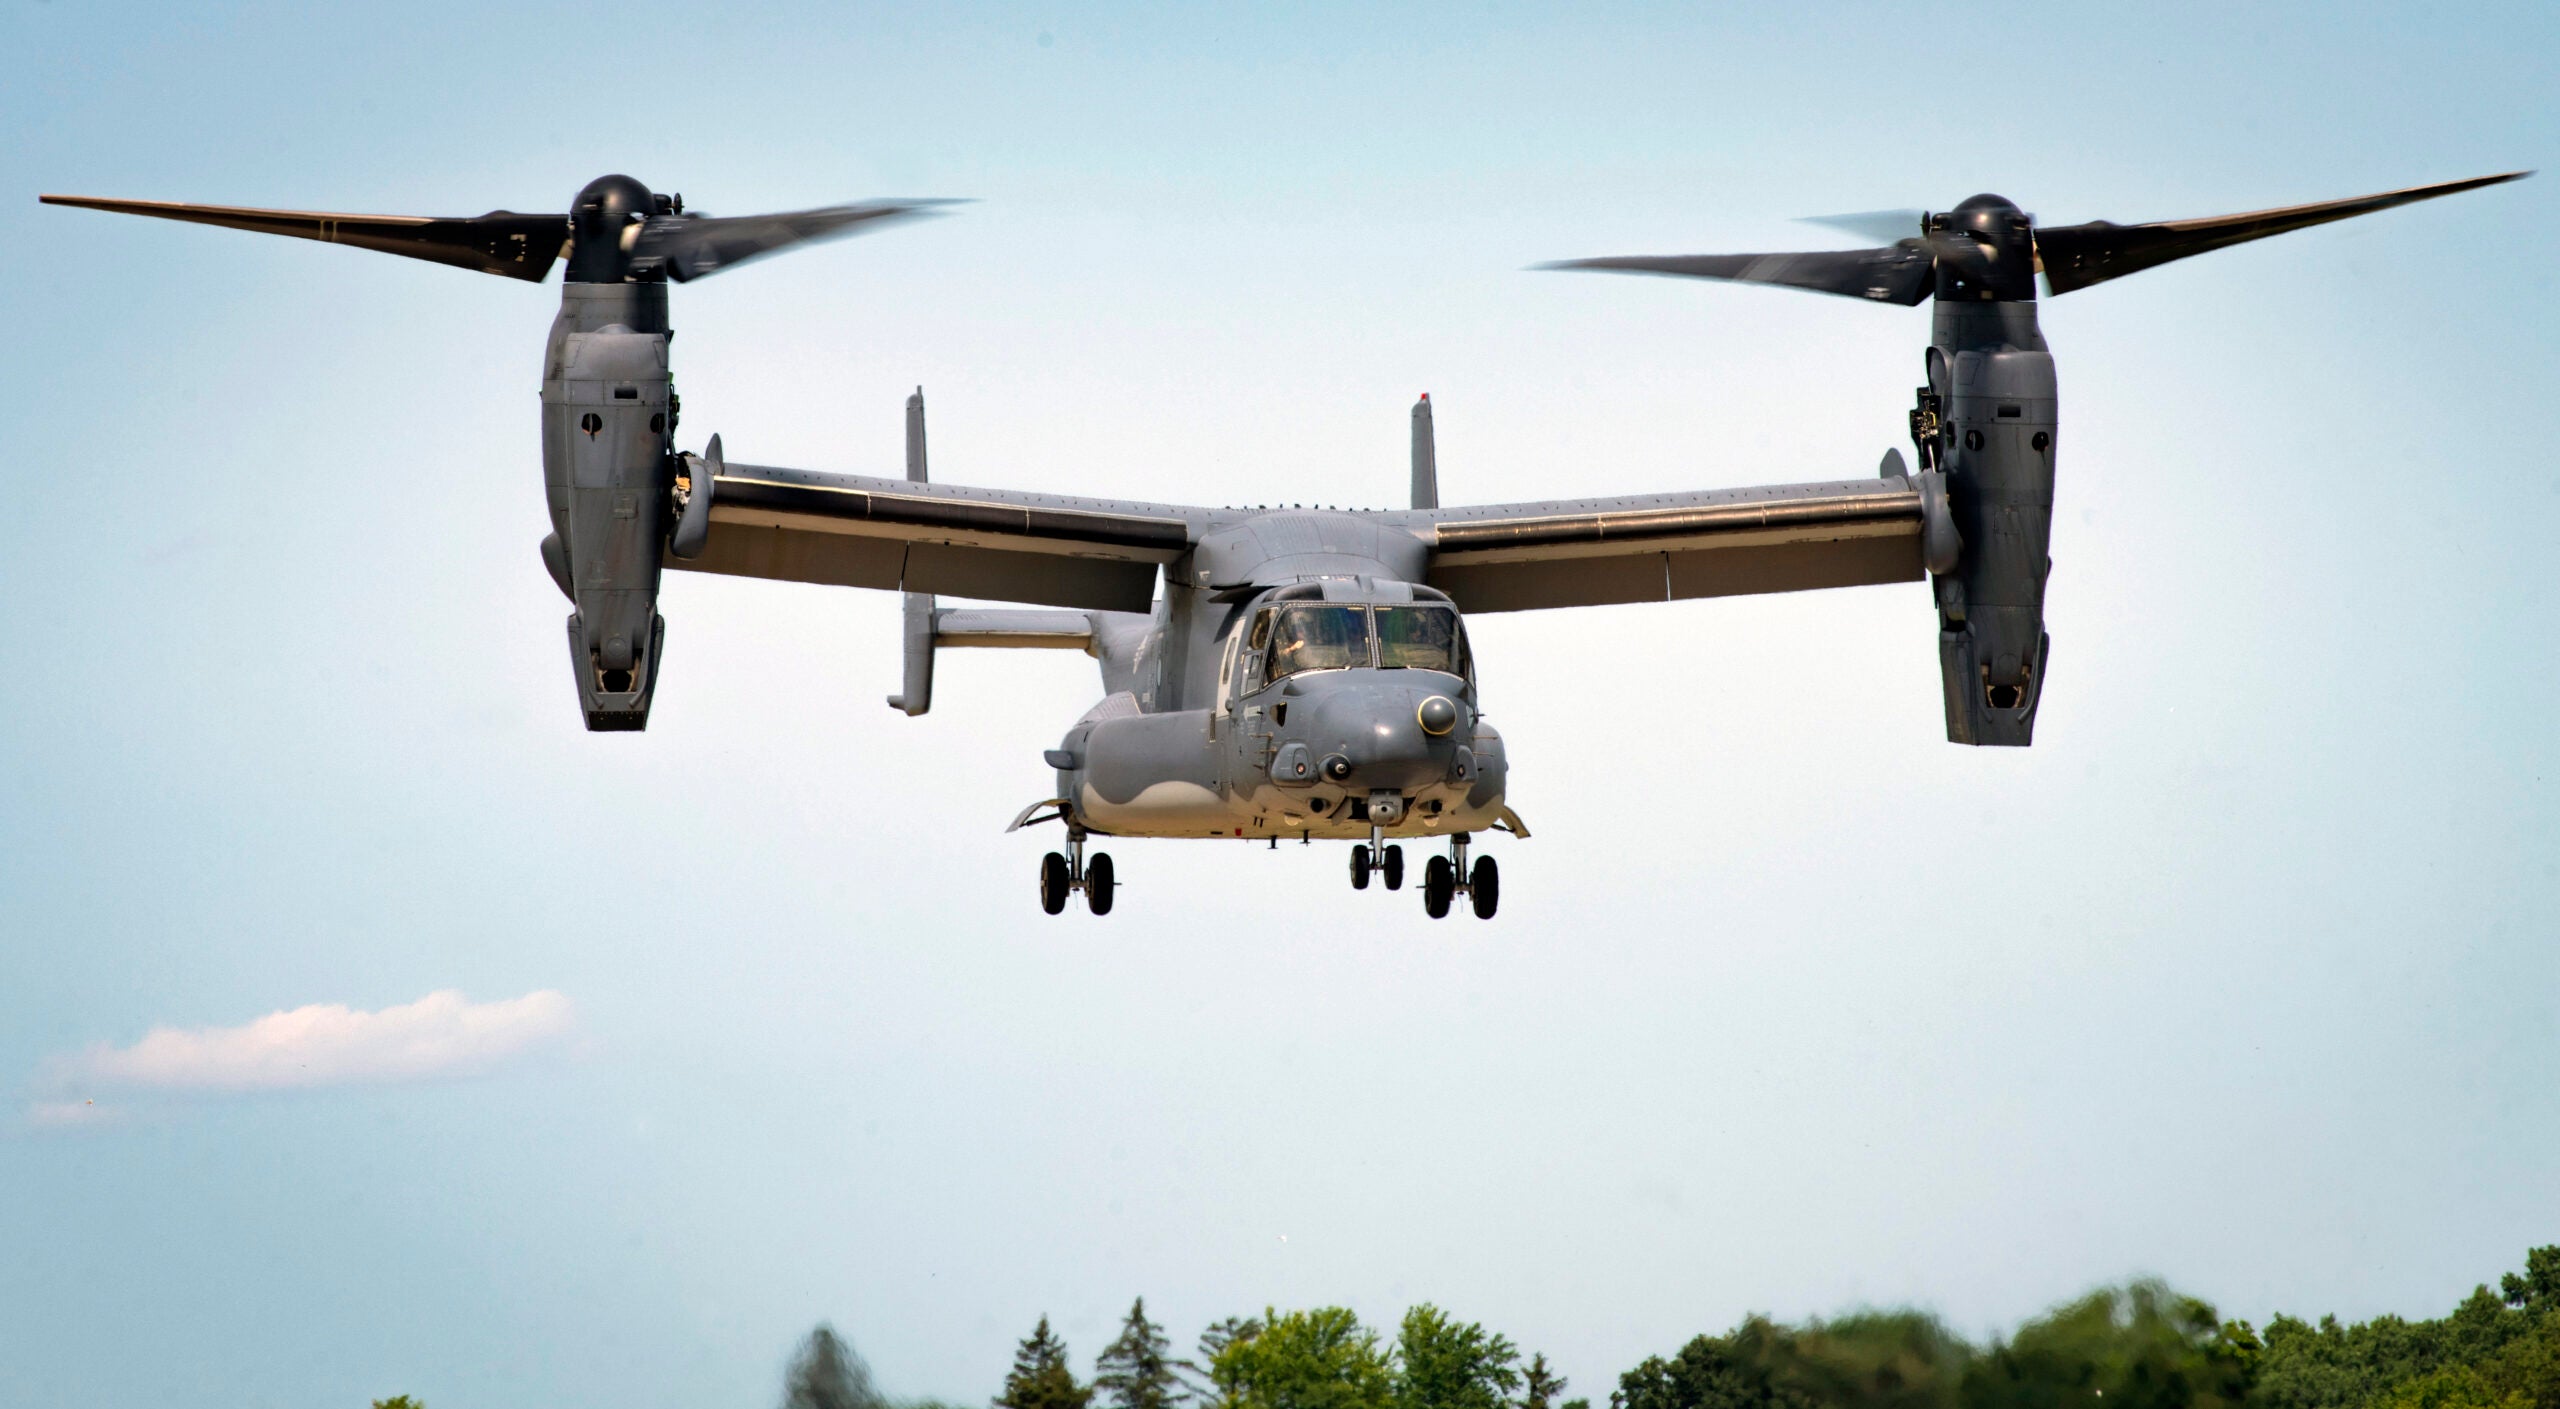 A CV-22 Osprey assigned to Air Force Special Operations Command prepares to land during an aerial demonstration at Wittman Regional Airport, Wis., July 30, 2021. With the various Air Force Special Operations Command aircraft and personnel in attendance, AFSOC brings specialized airpower and competitive advantage to the future warfighting environment. (U.S. Air Force photo by Senior Airman Miranda Mahoney)